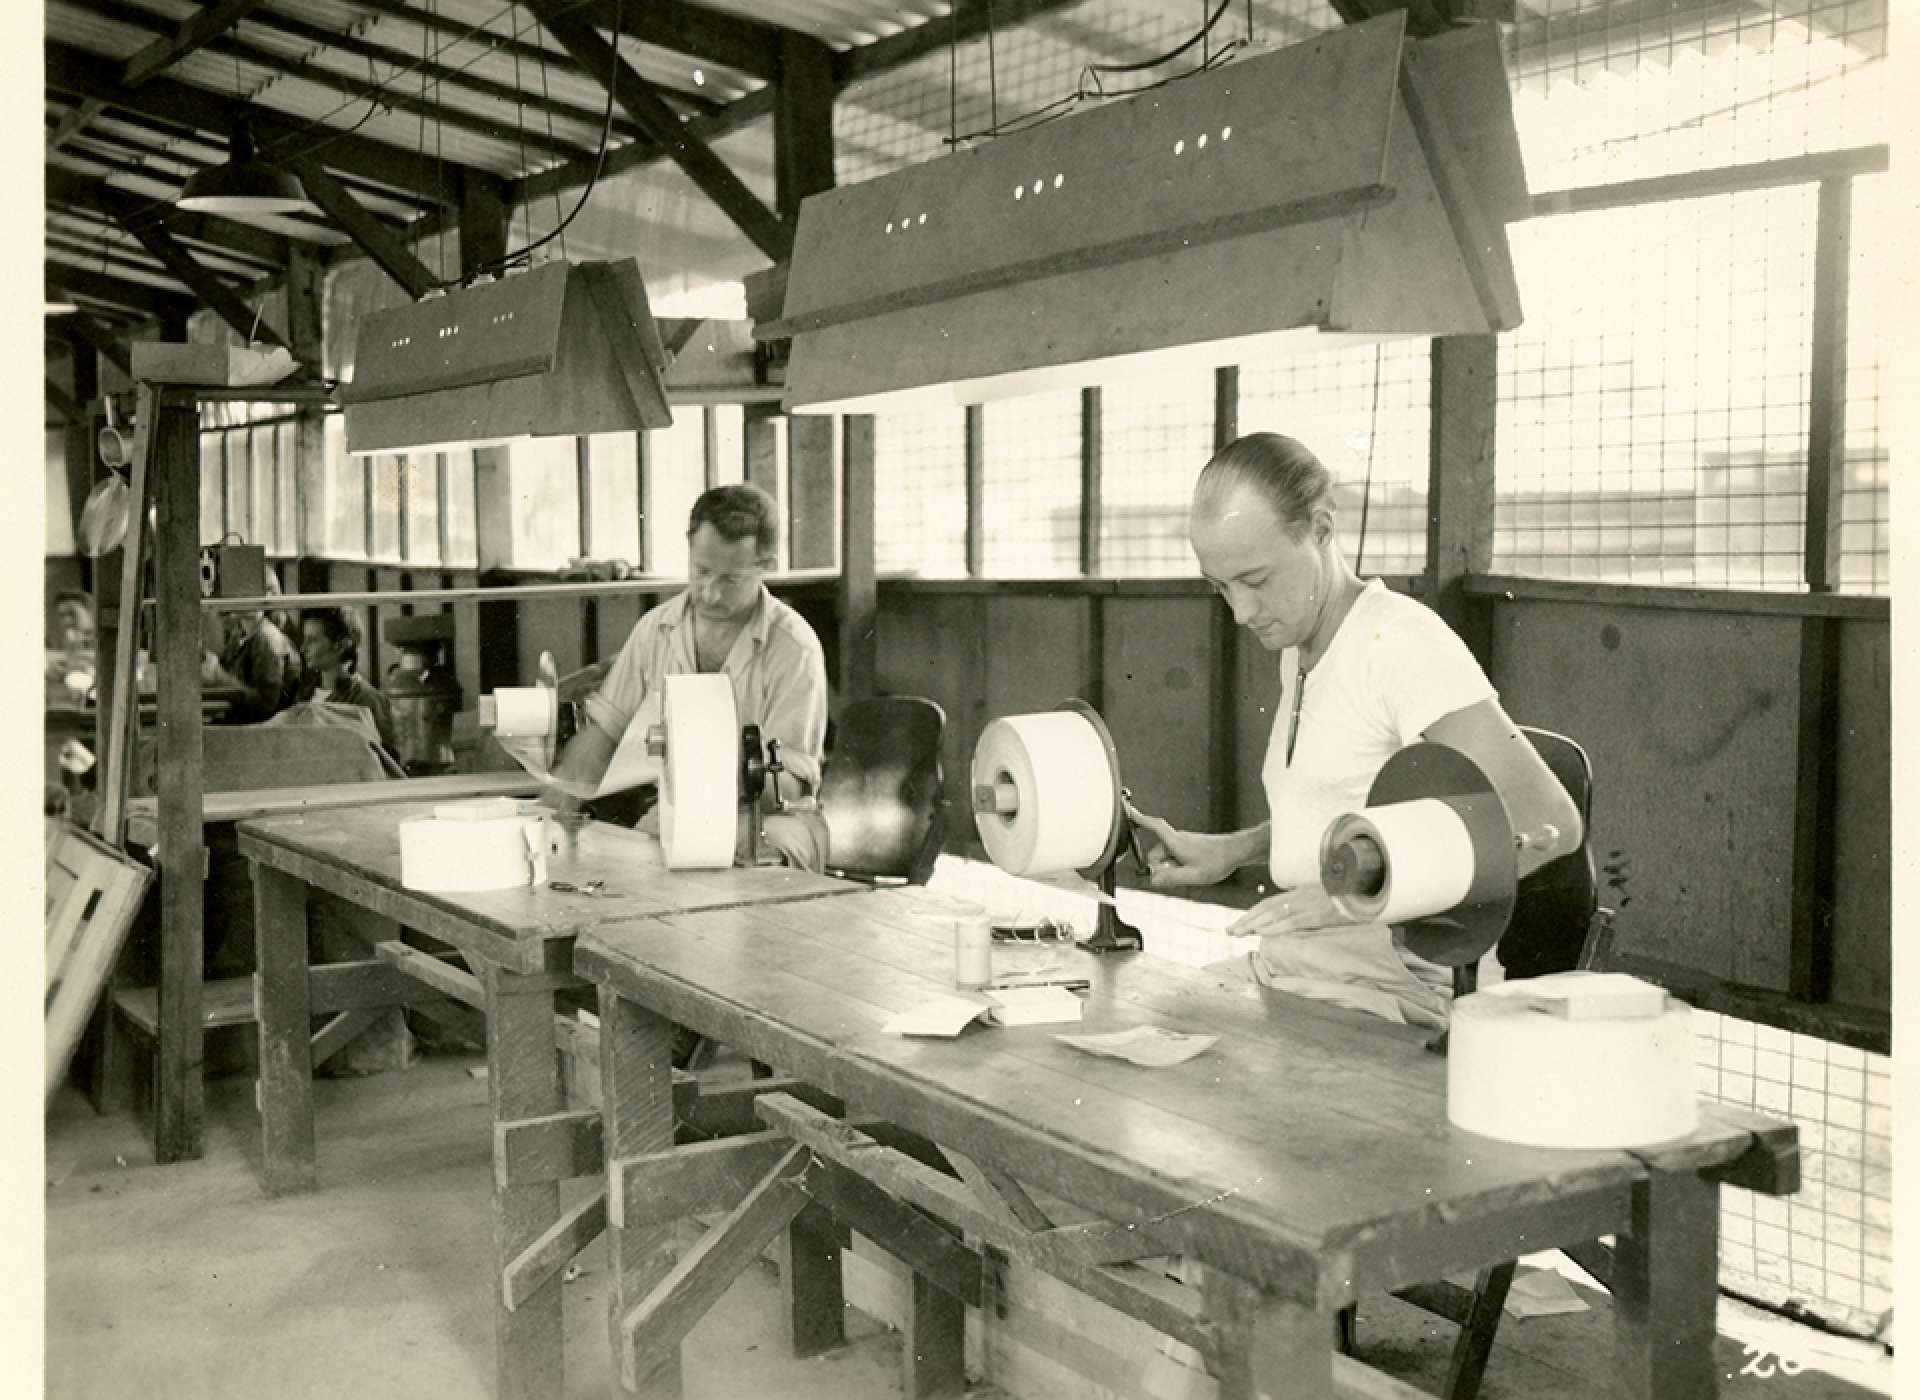 V-mail operation in the field at APO 929. “Paper inspection. At these tables each roll of finished work is inspected letter by letter and all badly reproduced letters are marked out. Where possible, an attempt is made to produce a better print in the Reprint department. Letters which cannot be satisfactorily reproduced are either sent back to the States to be rephotographed or to be sent via regular mail.” Port Moresby, Papua New Guinea. 1944